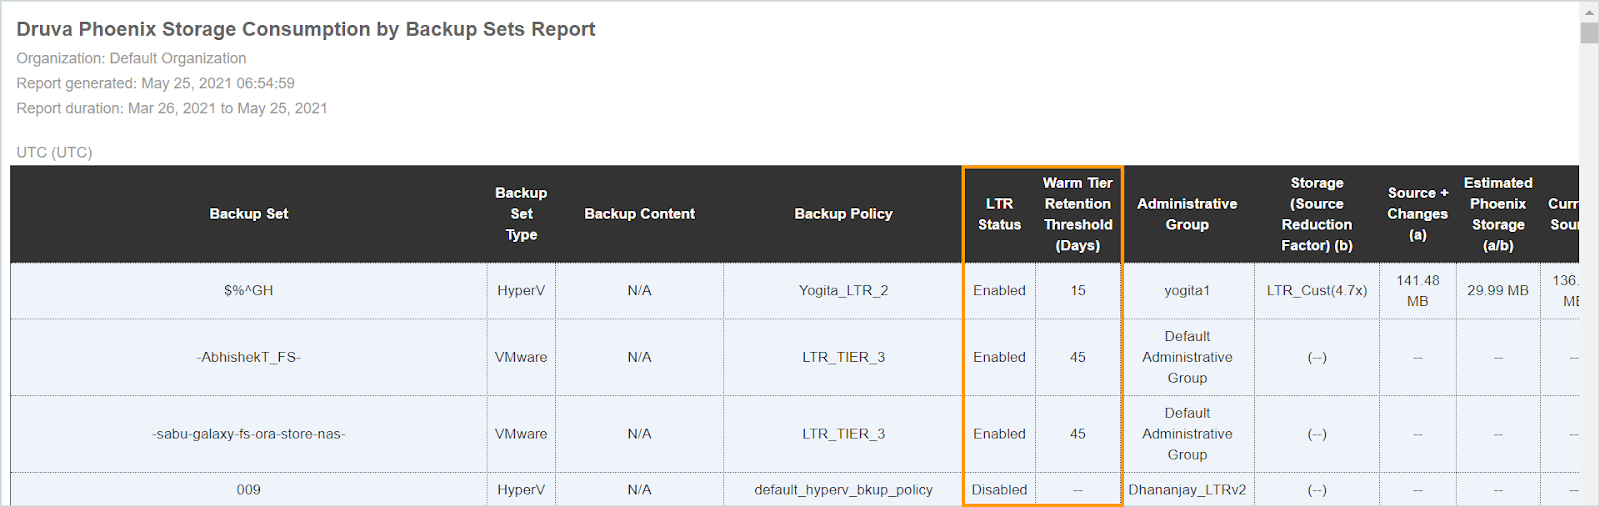 Enable_LTR_Storage Consumption by Backup Sets report.png